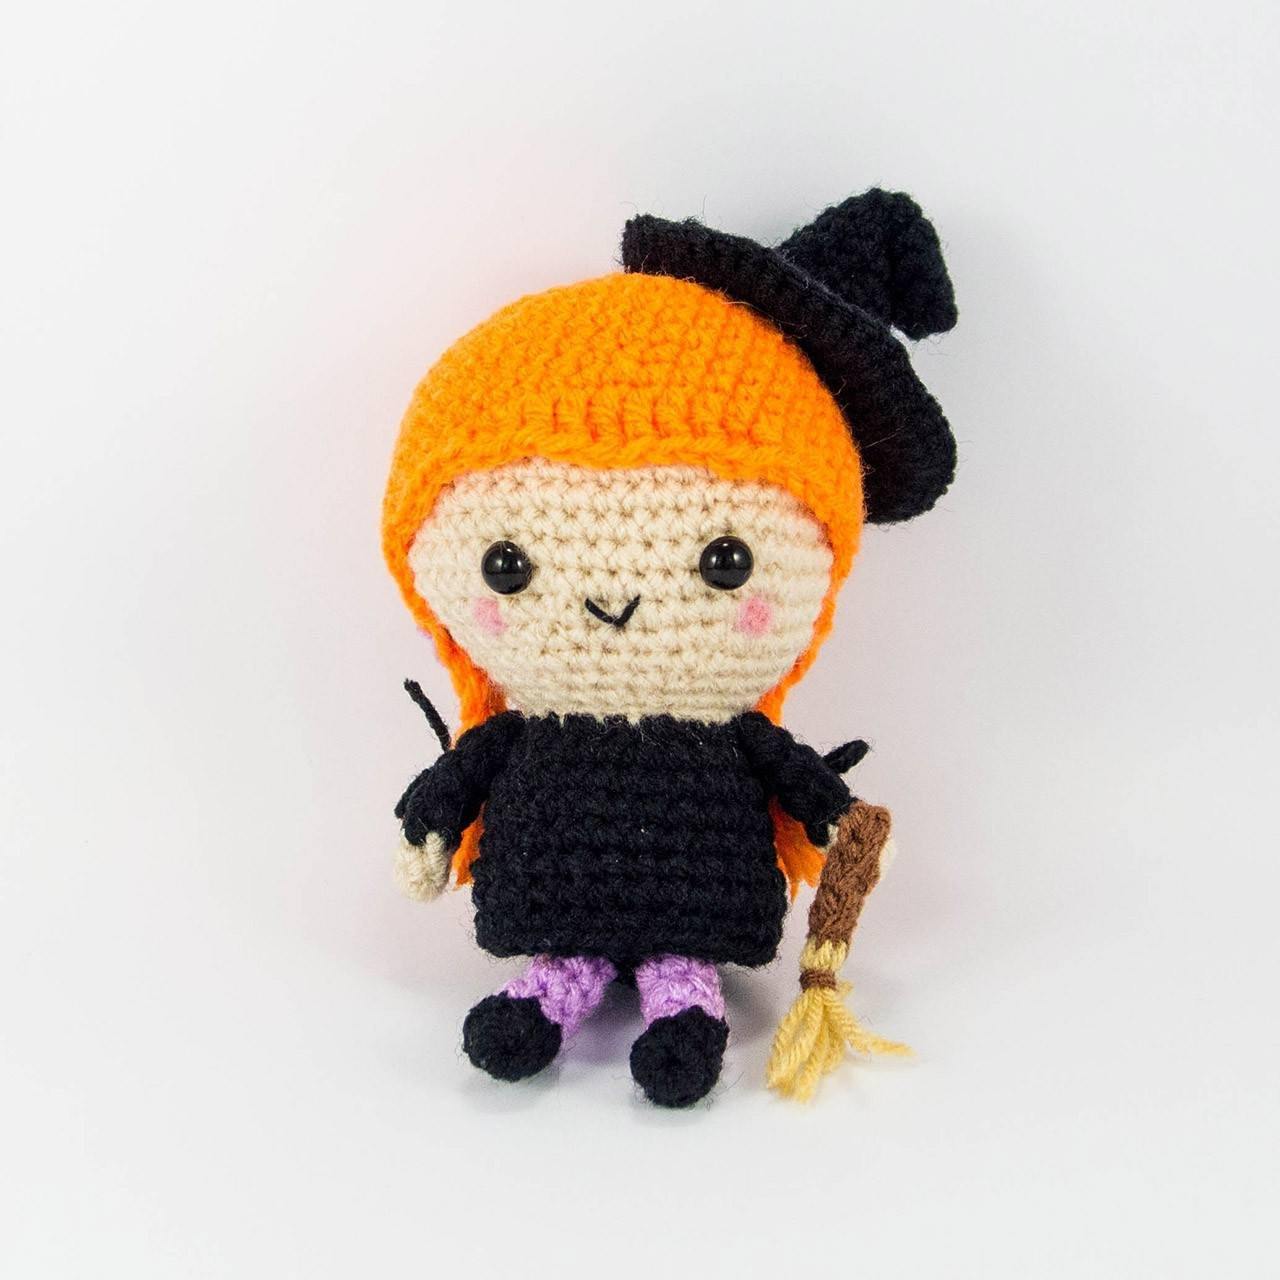 Witch crochet toy with orange hair